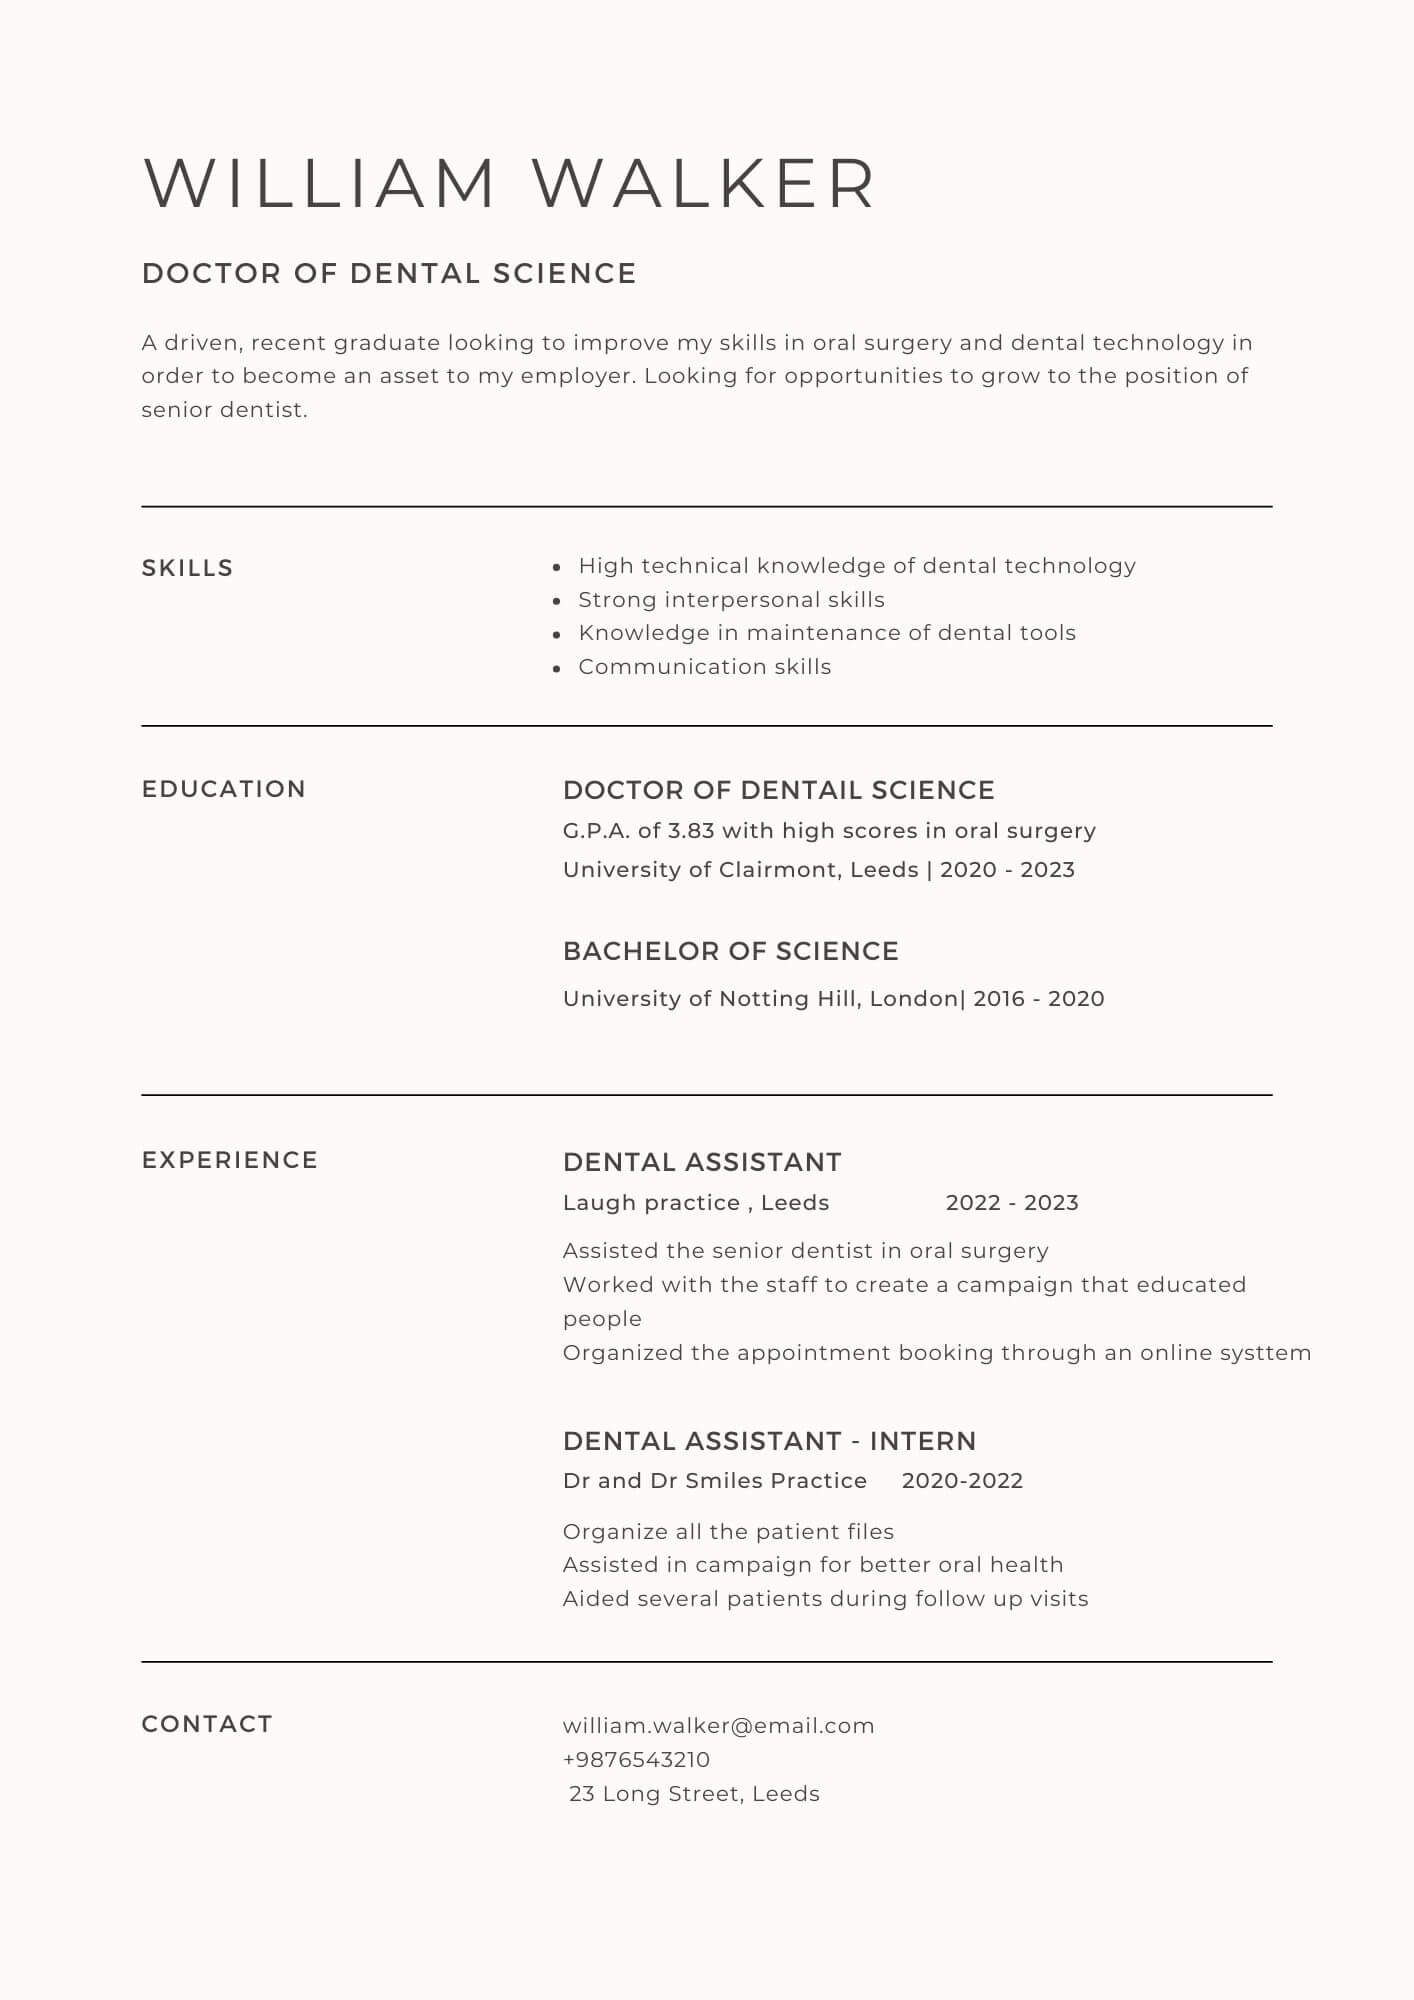 A guide to writing the best resume for a Dentist position